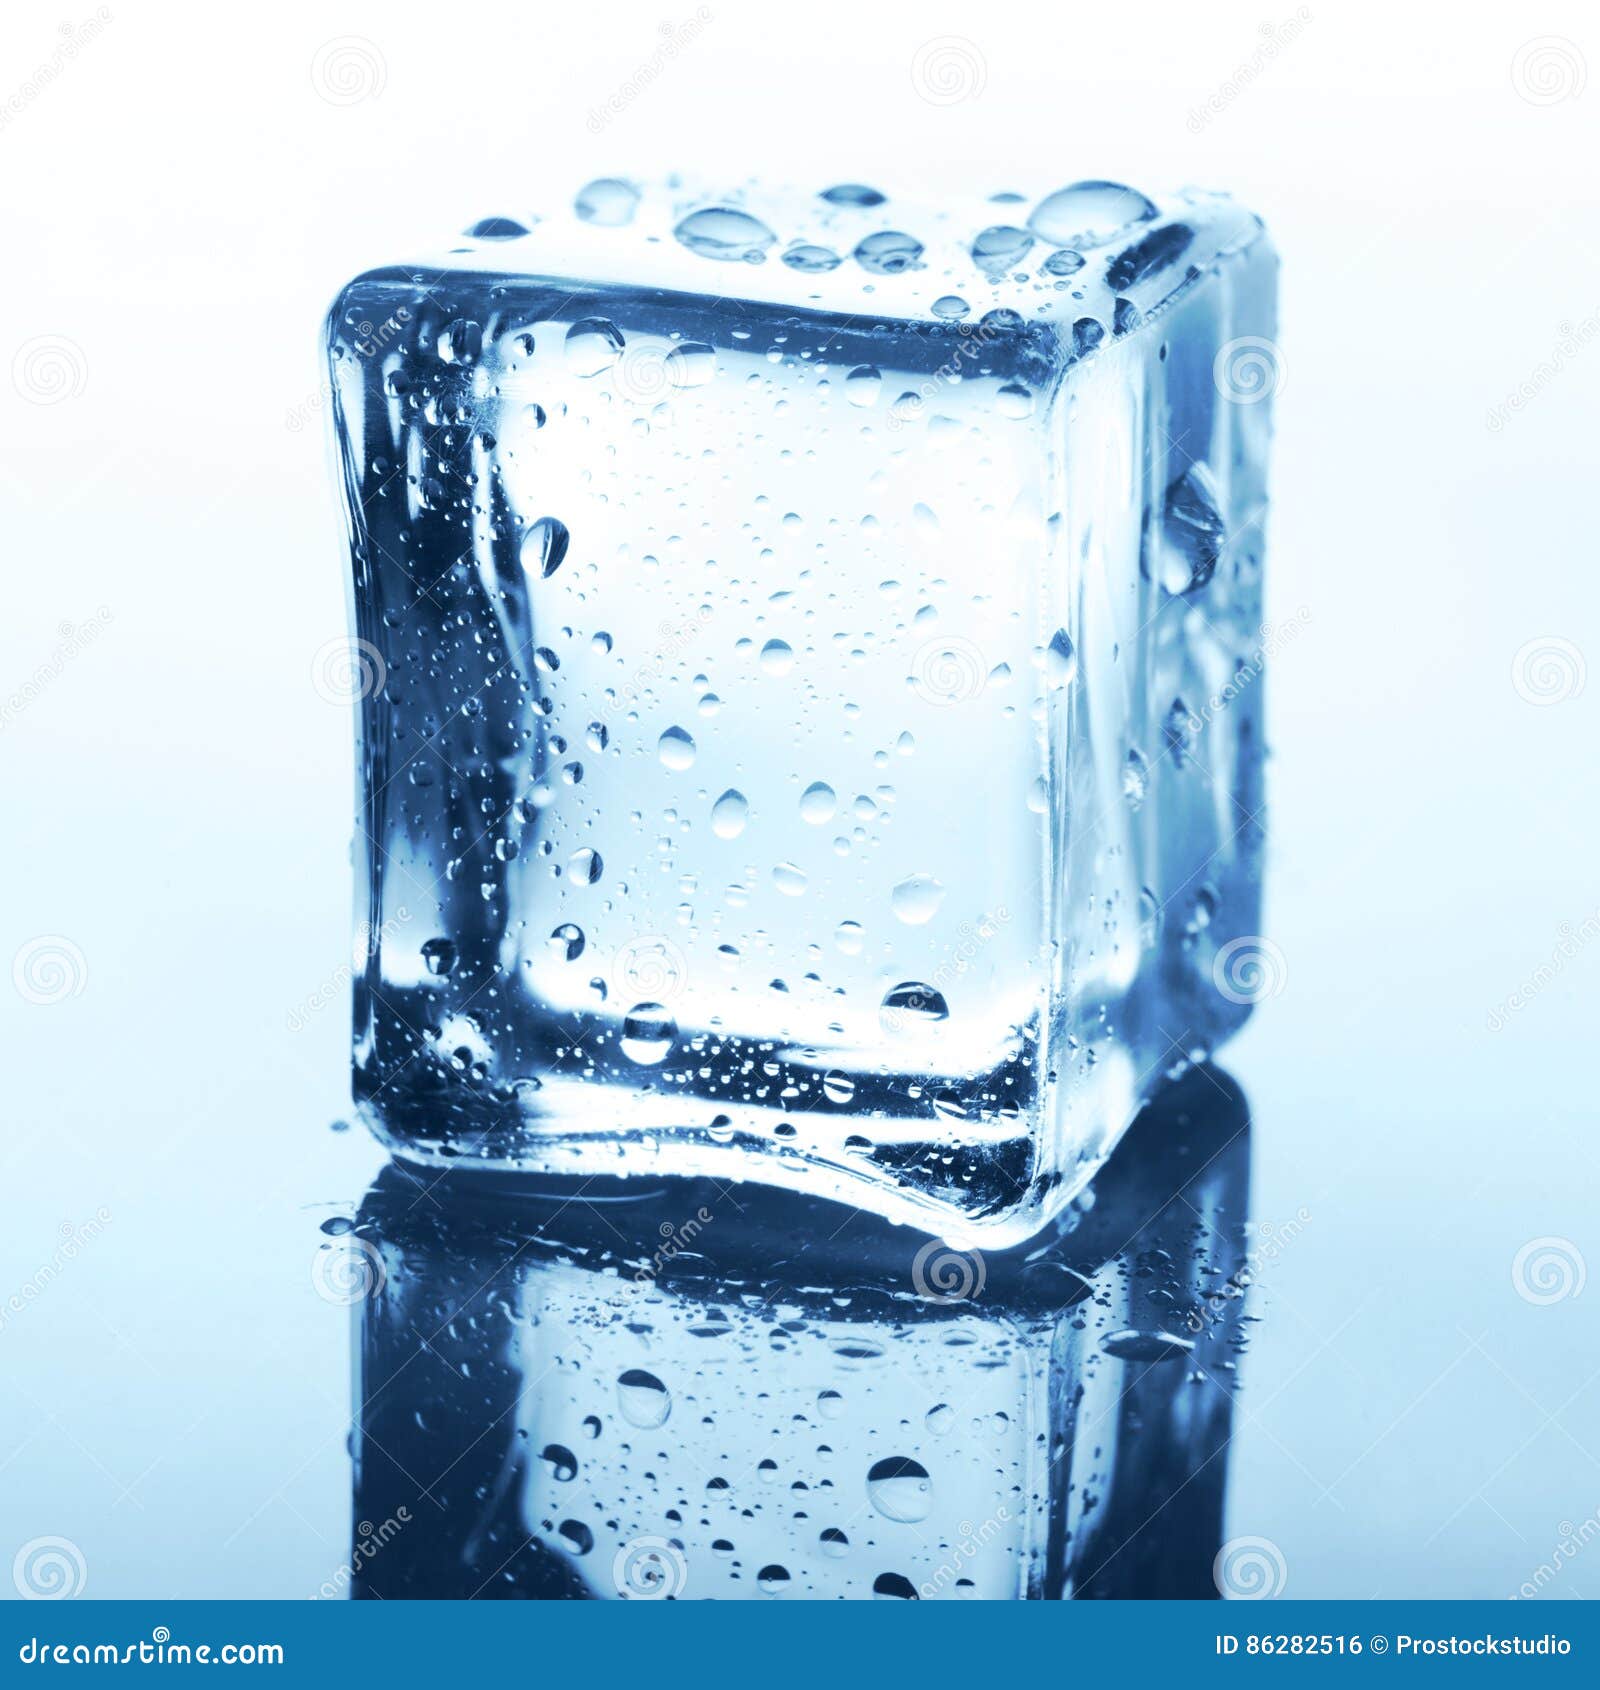 https://thumbs.dreamstime.com/z/transparent-ice-cube-reflection-blue-glass-water-drops-white-background-closeup-cold-crystal-block-86282516.jpg